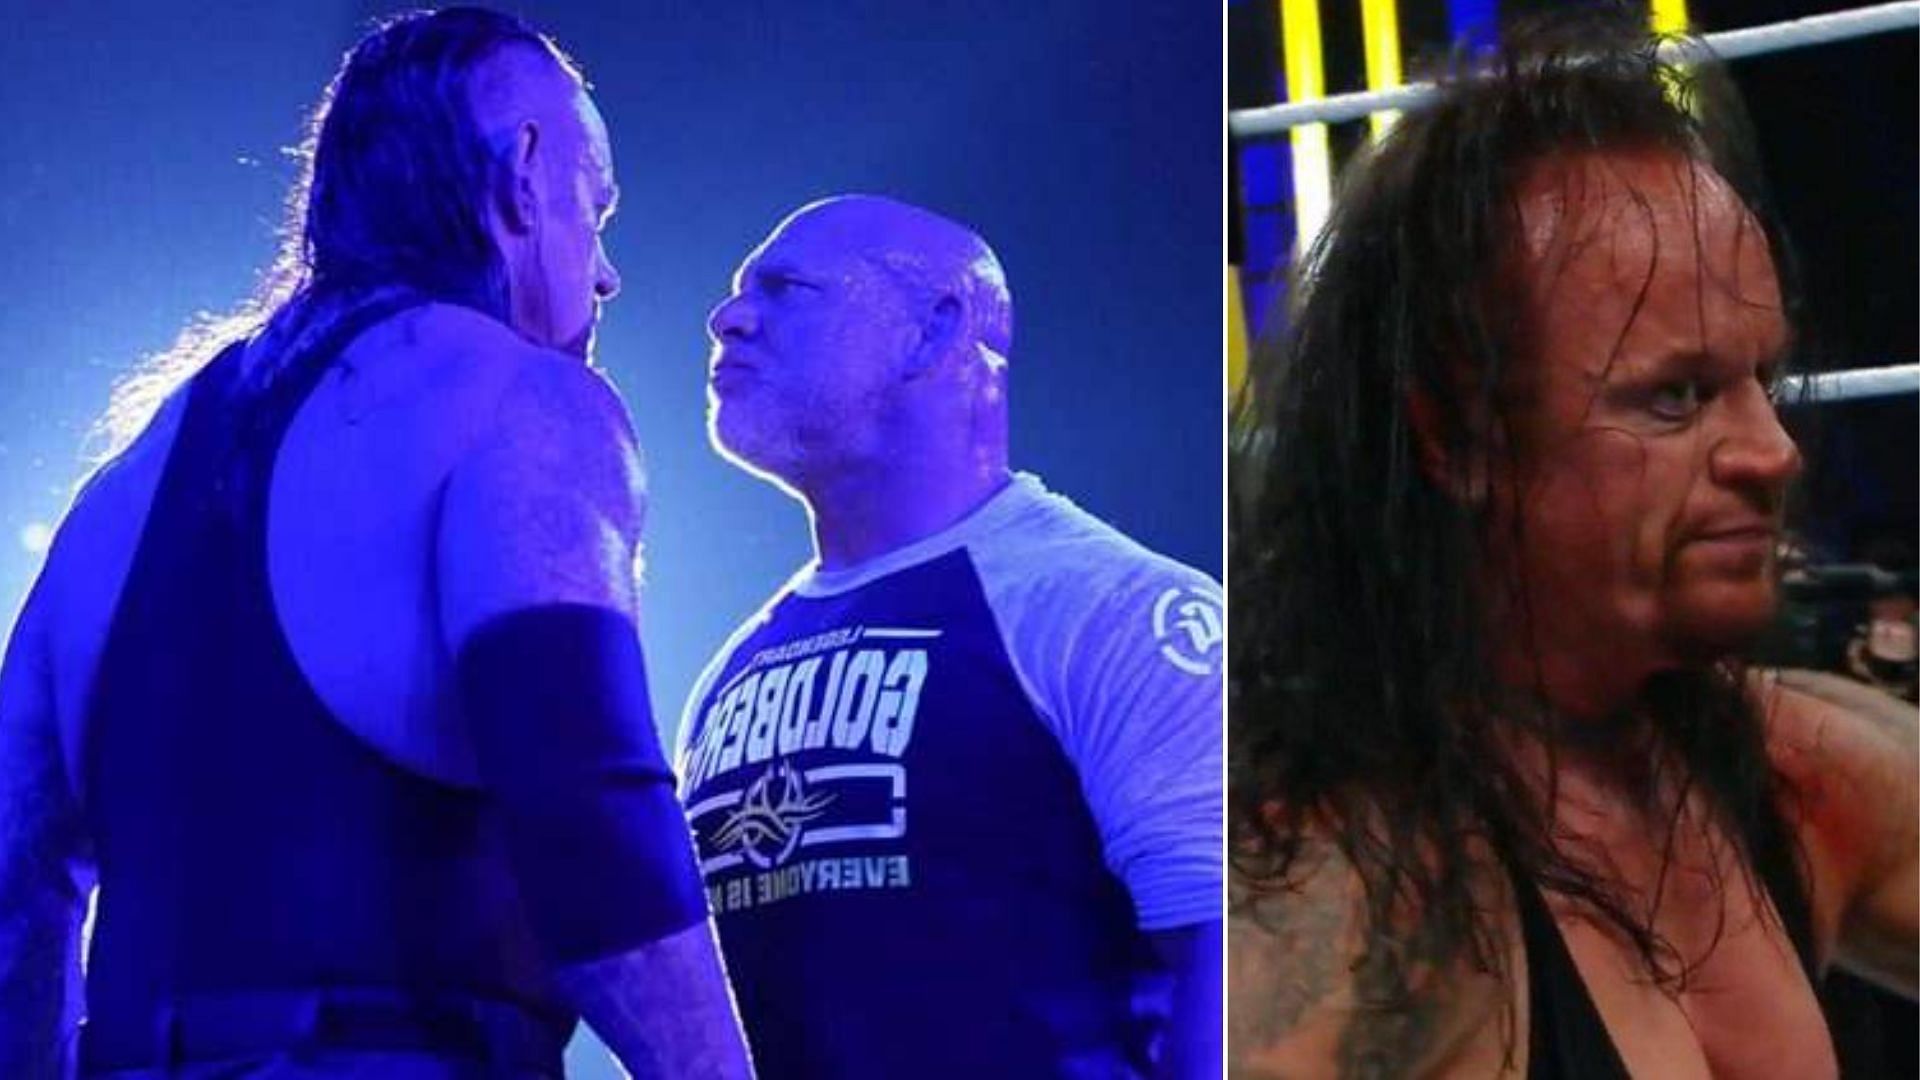 The Undertaker versus Goldberg may have looked good on paper, but the match itself was a disaster